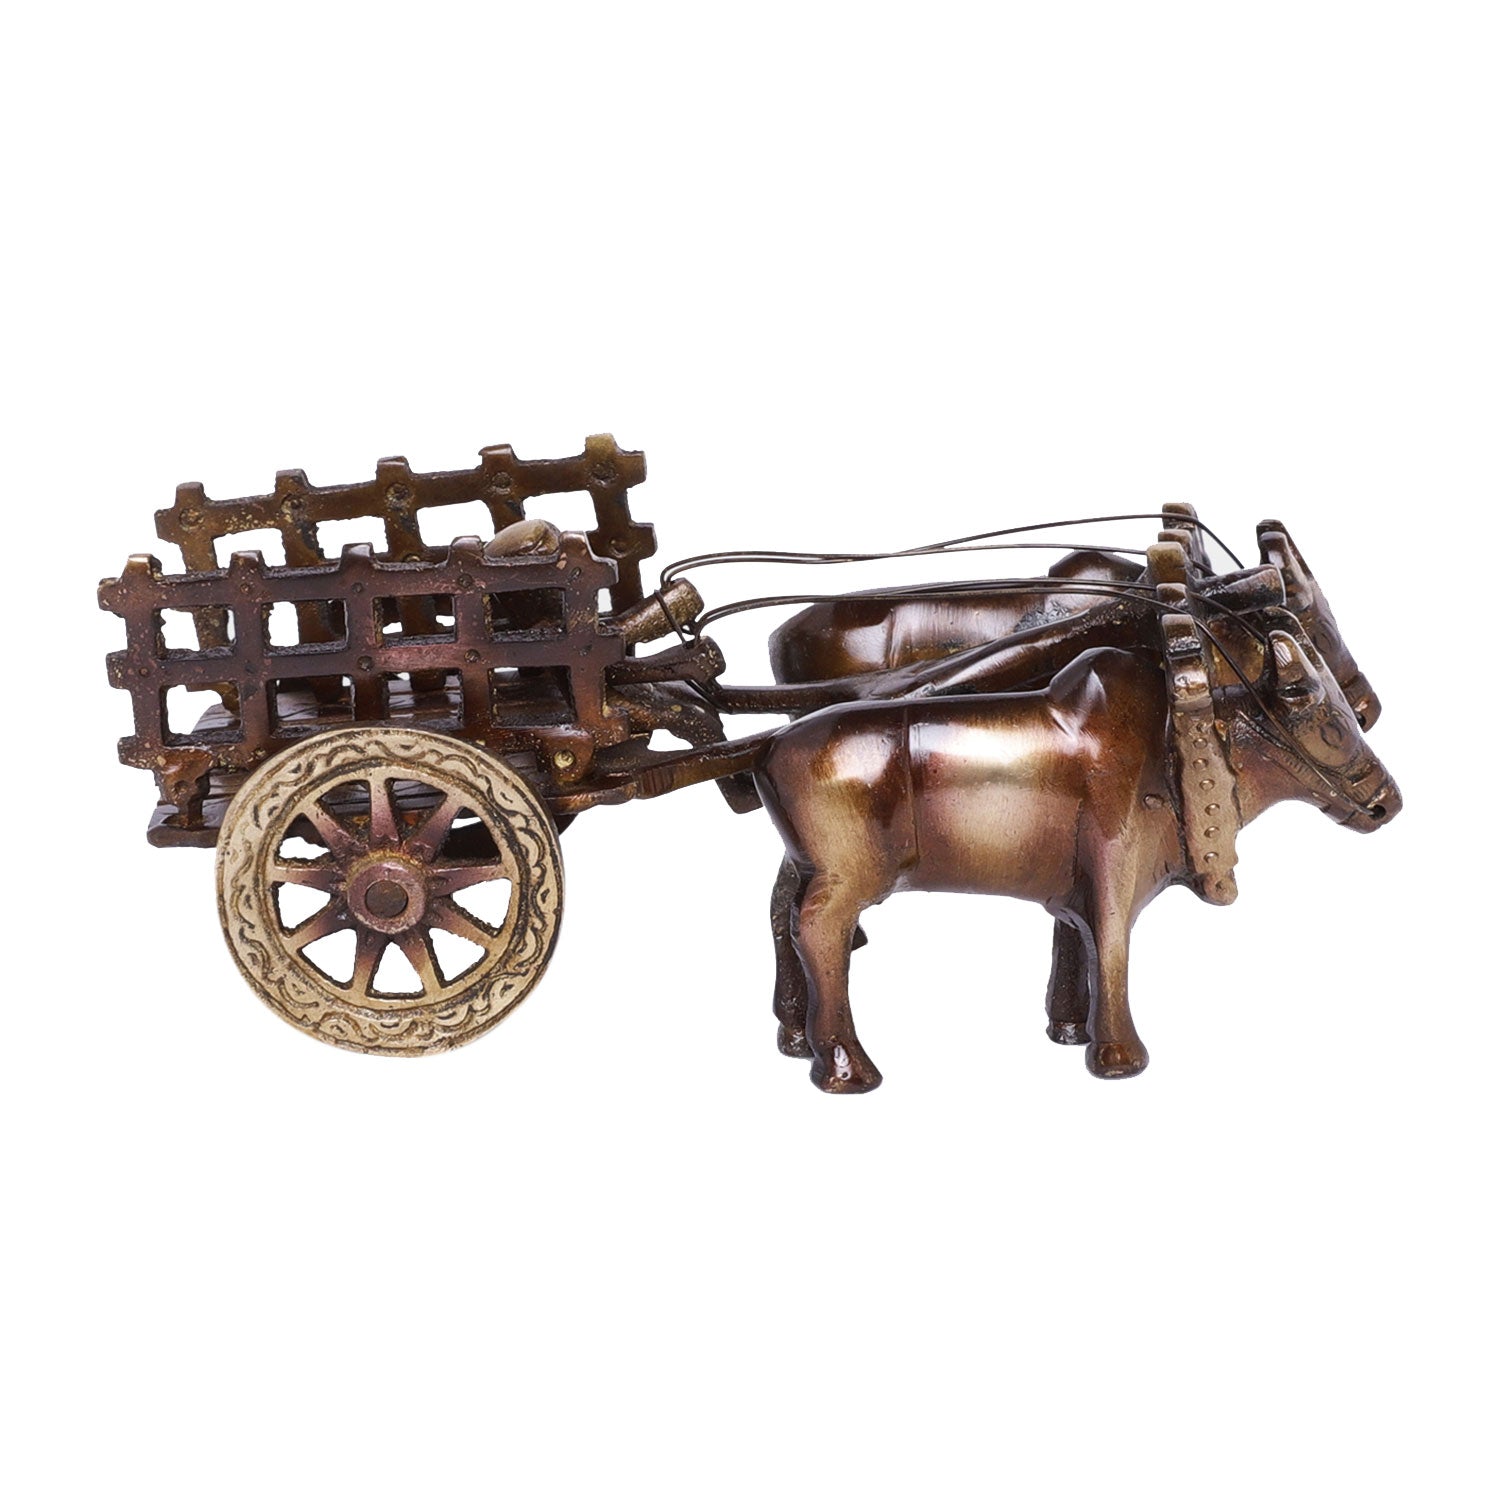 The Bombay Store Bullock Cart Wood Art Frame 9 in x 10 in